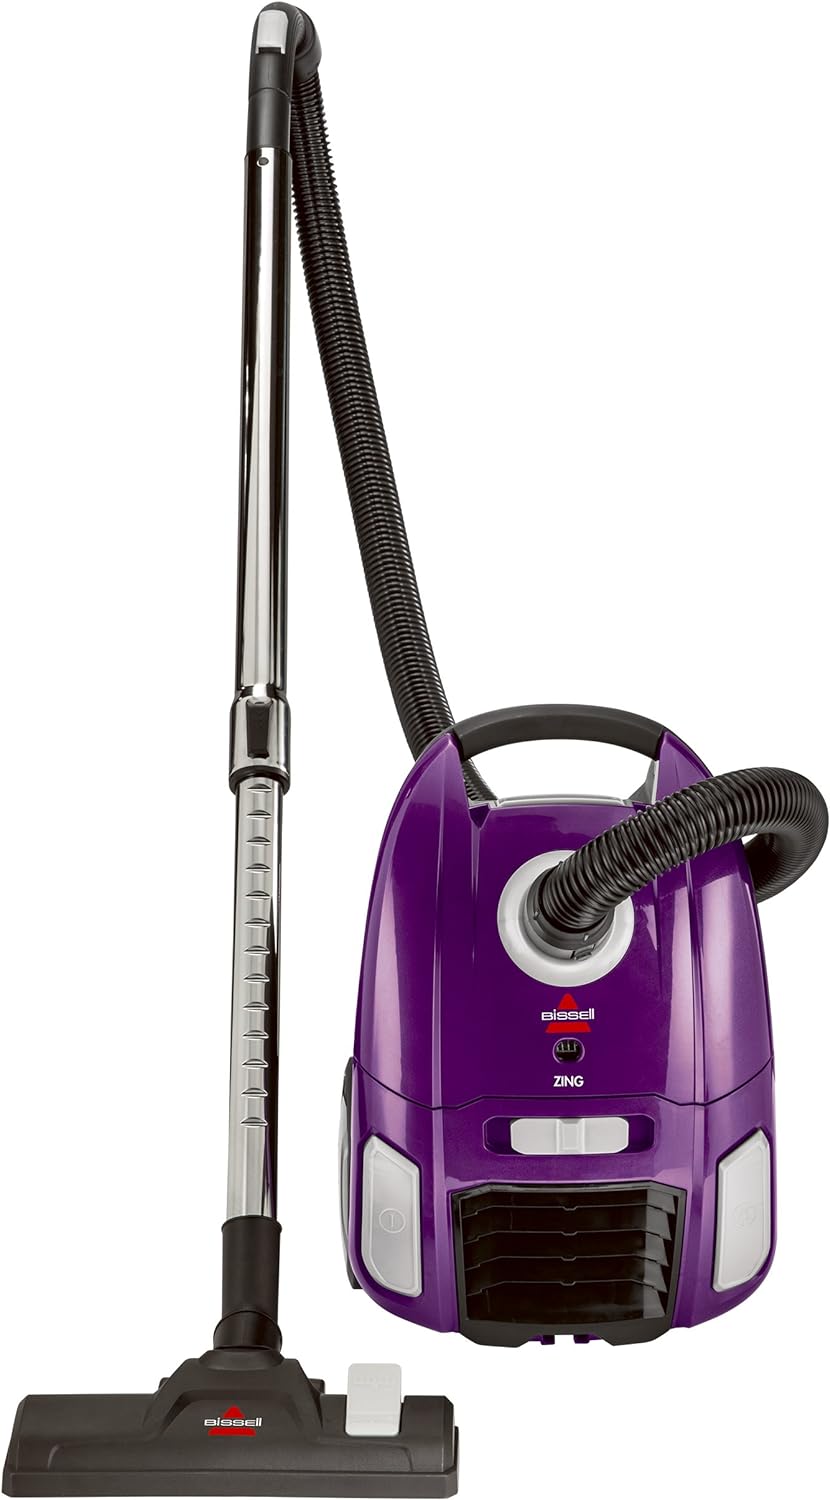 BISSELL Zing Lightweight, Bagged Canister Vacuum